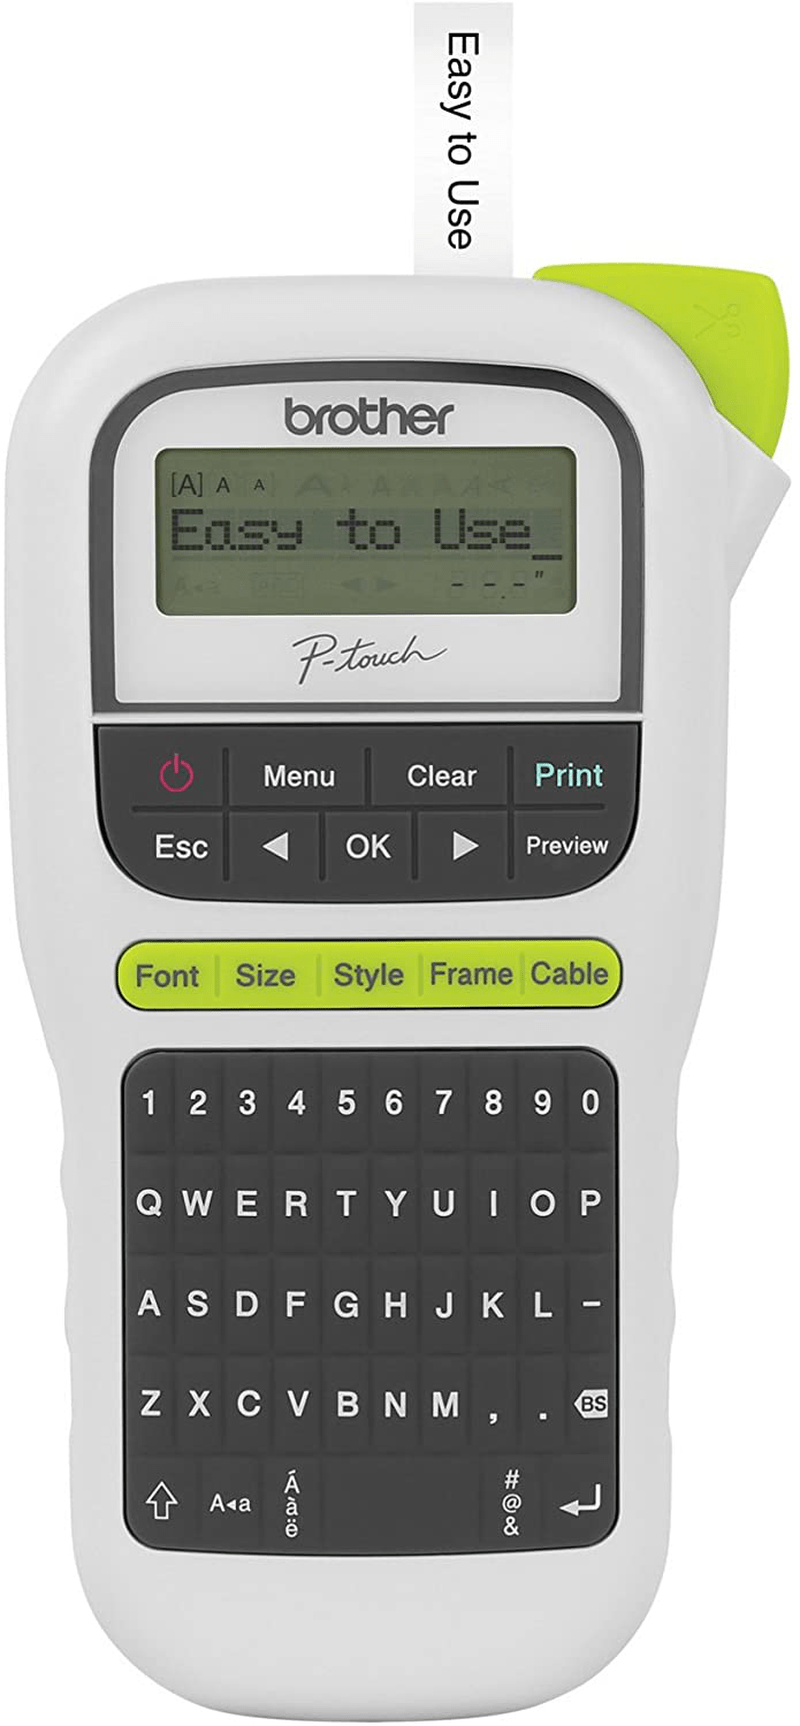 Brother P-Touch, PTH110, Easy Portable Label Maker, Lightweight, Qwerty Keyboard, One-Touch Keys, White